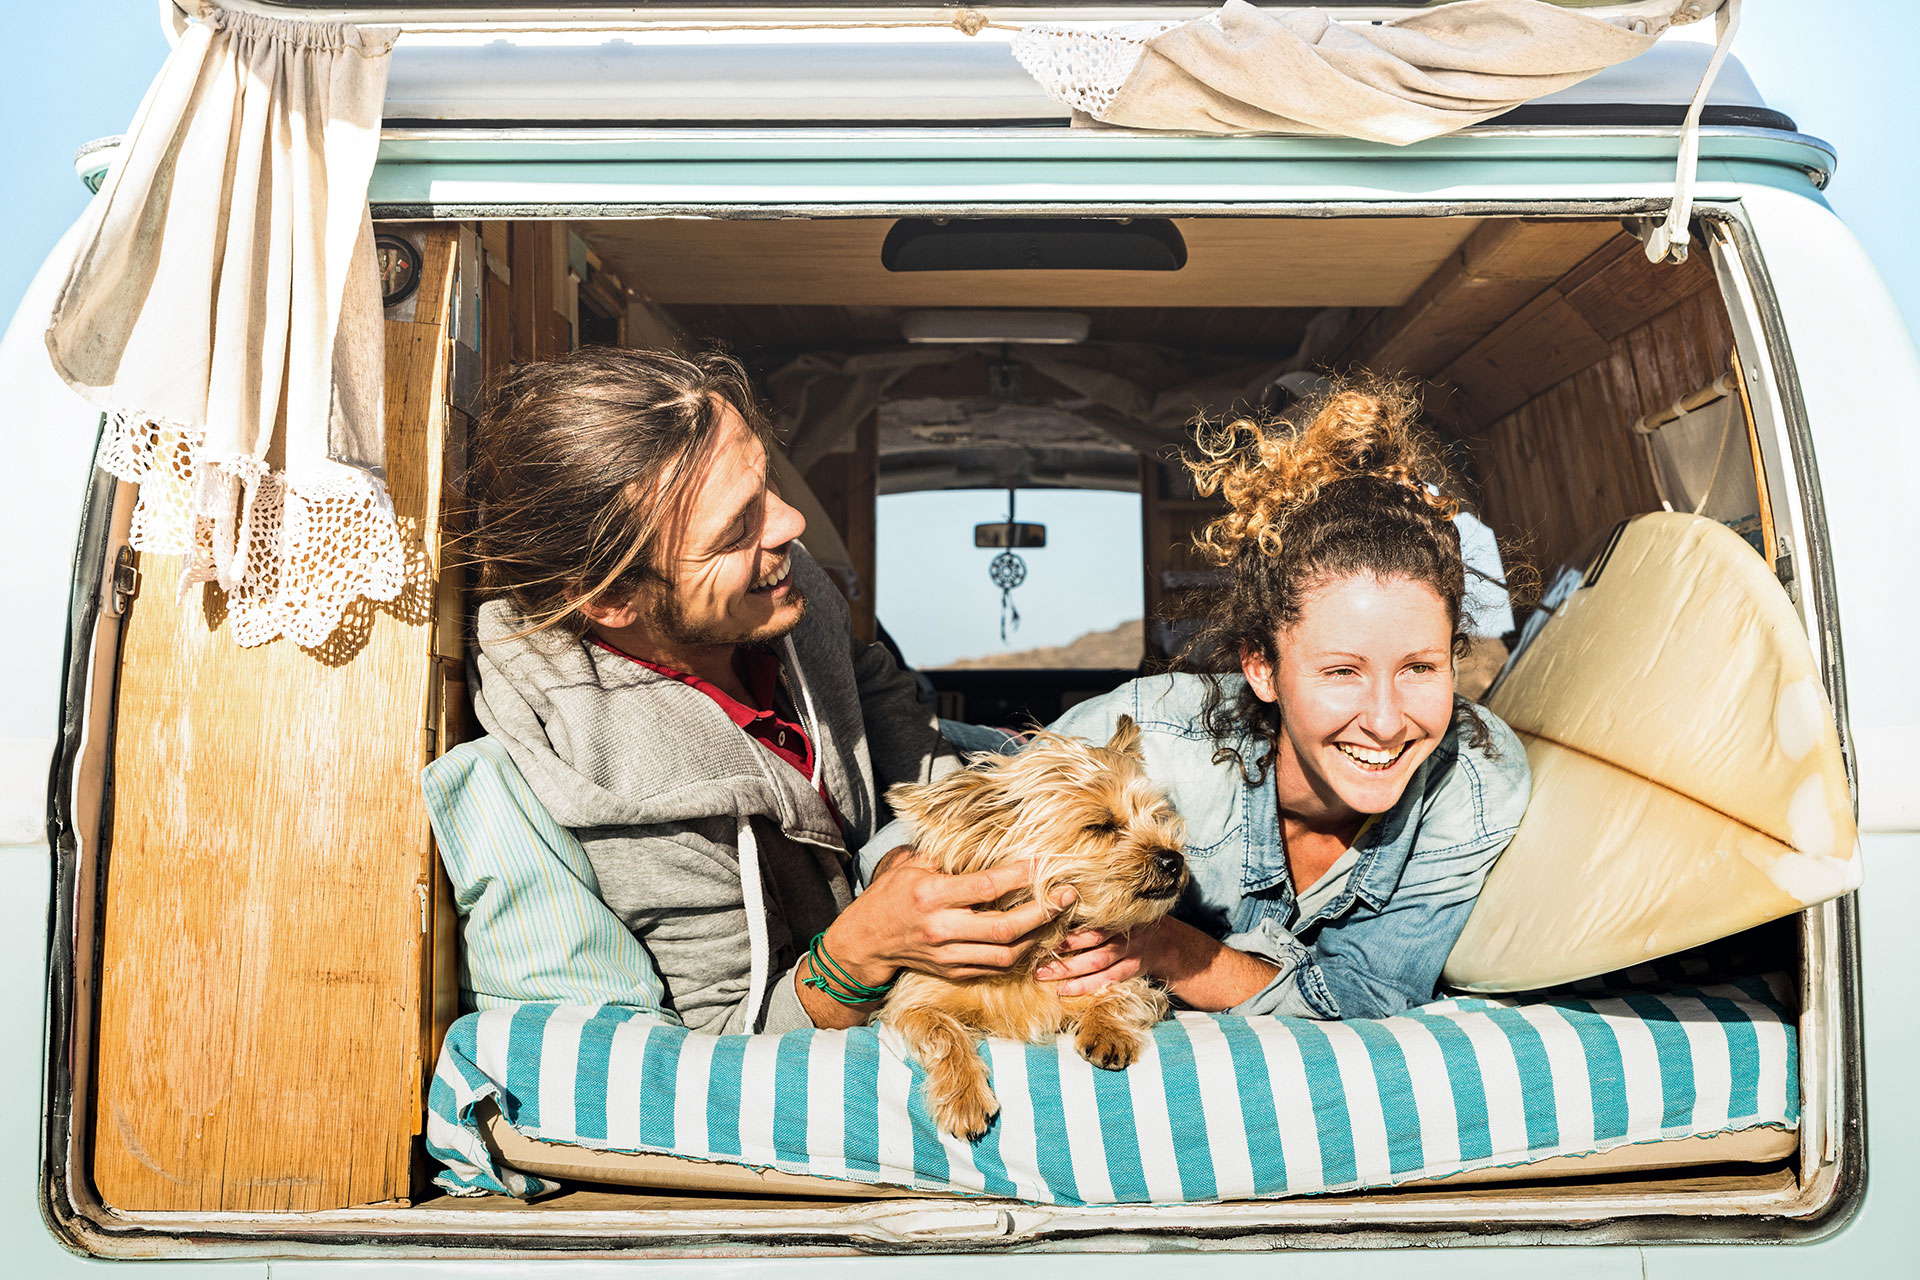 10 Things You Need to Know Before Living in a Campervan